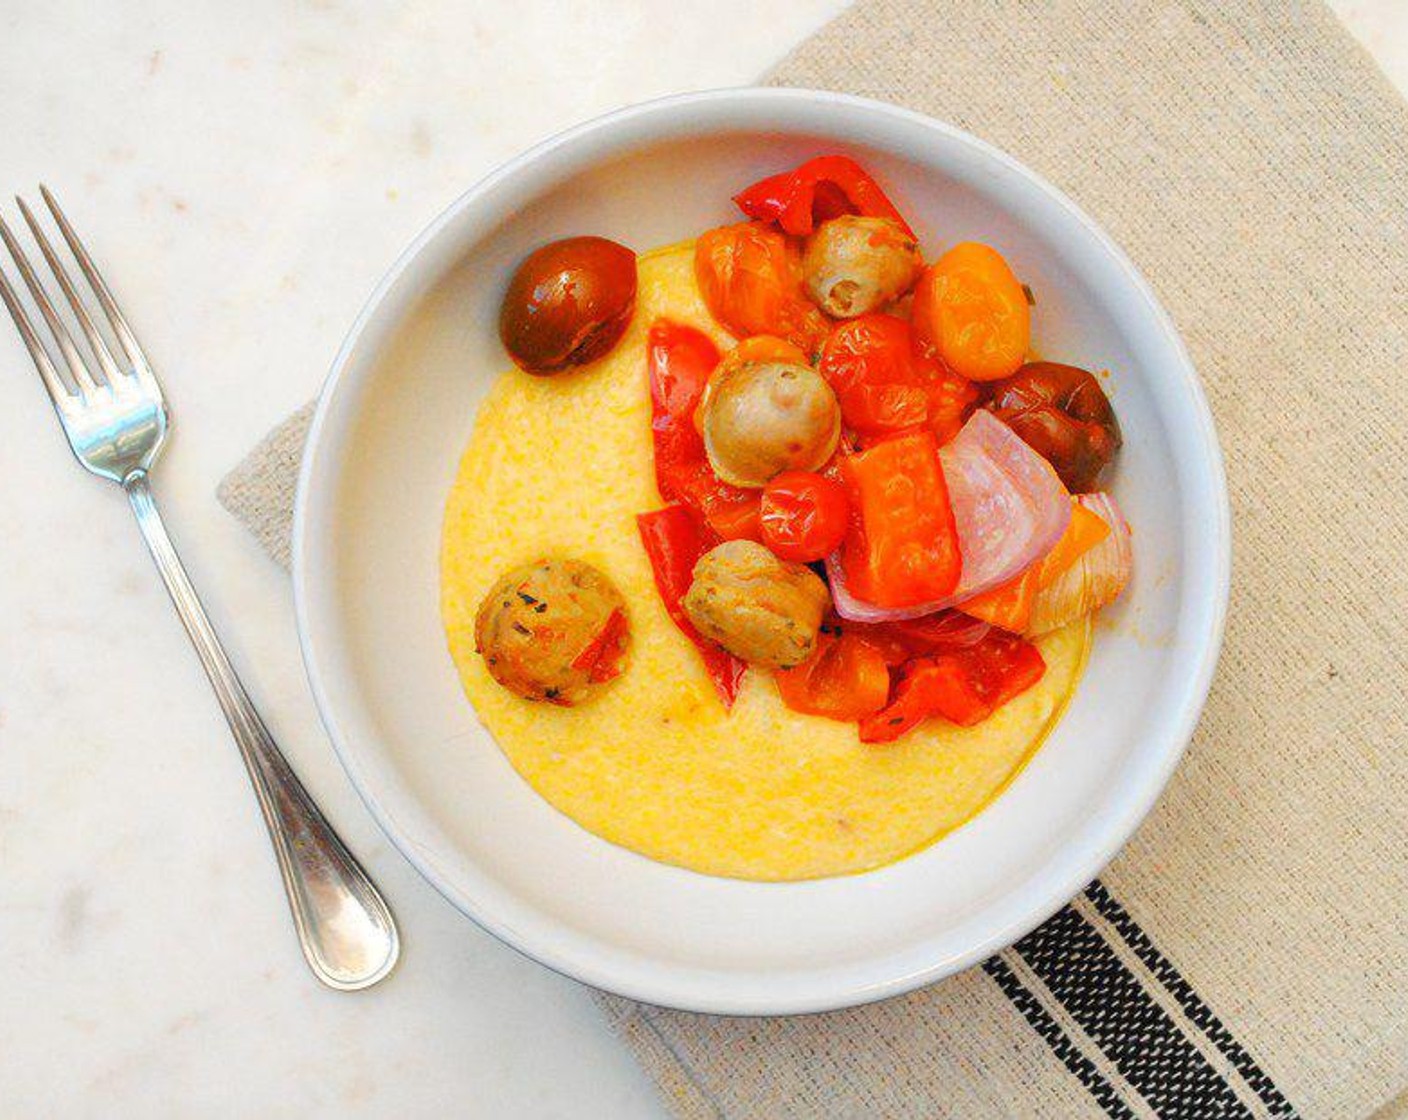 Sheet Pan Sausage & Peppers over Cheesy Polenta